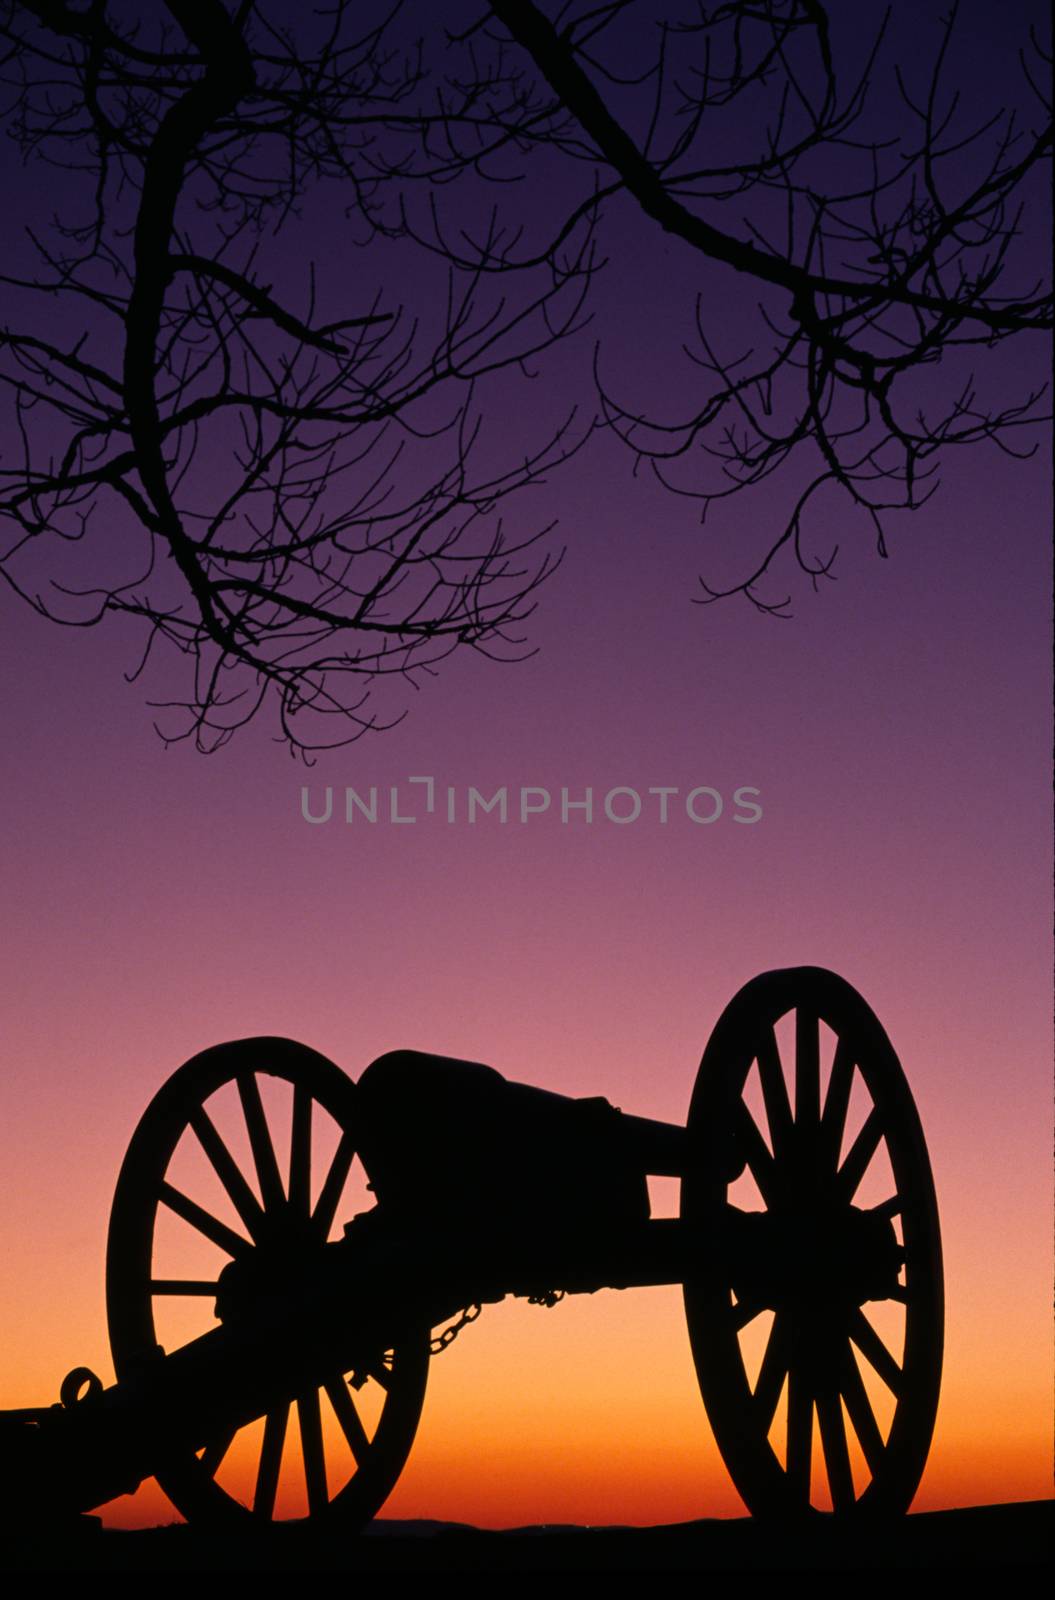 Relics from prior American War sit in the sunset